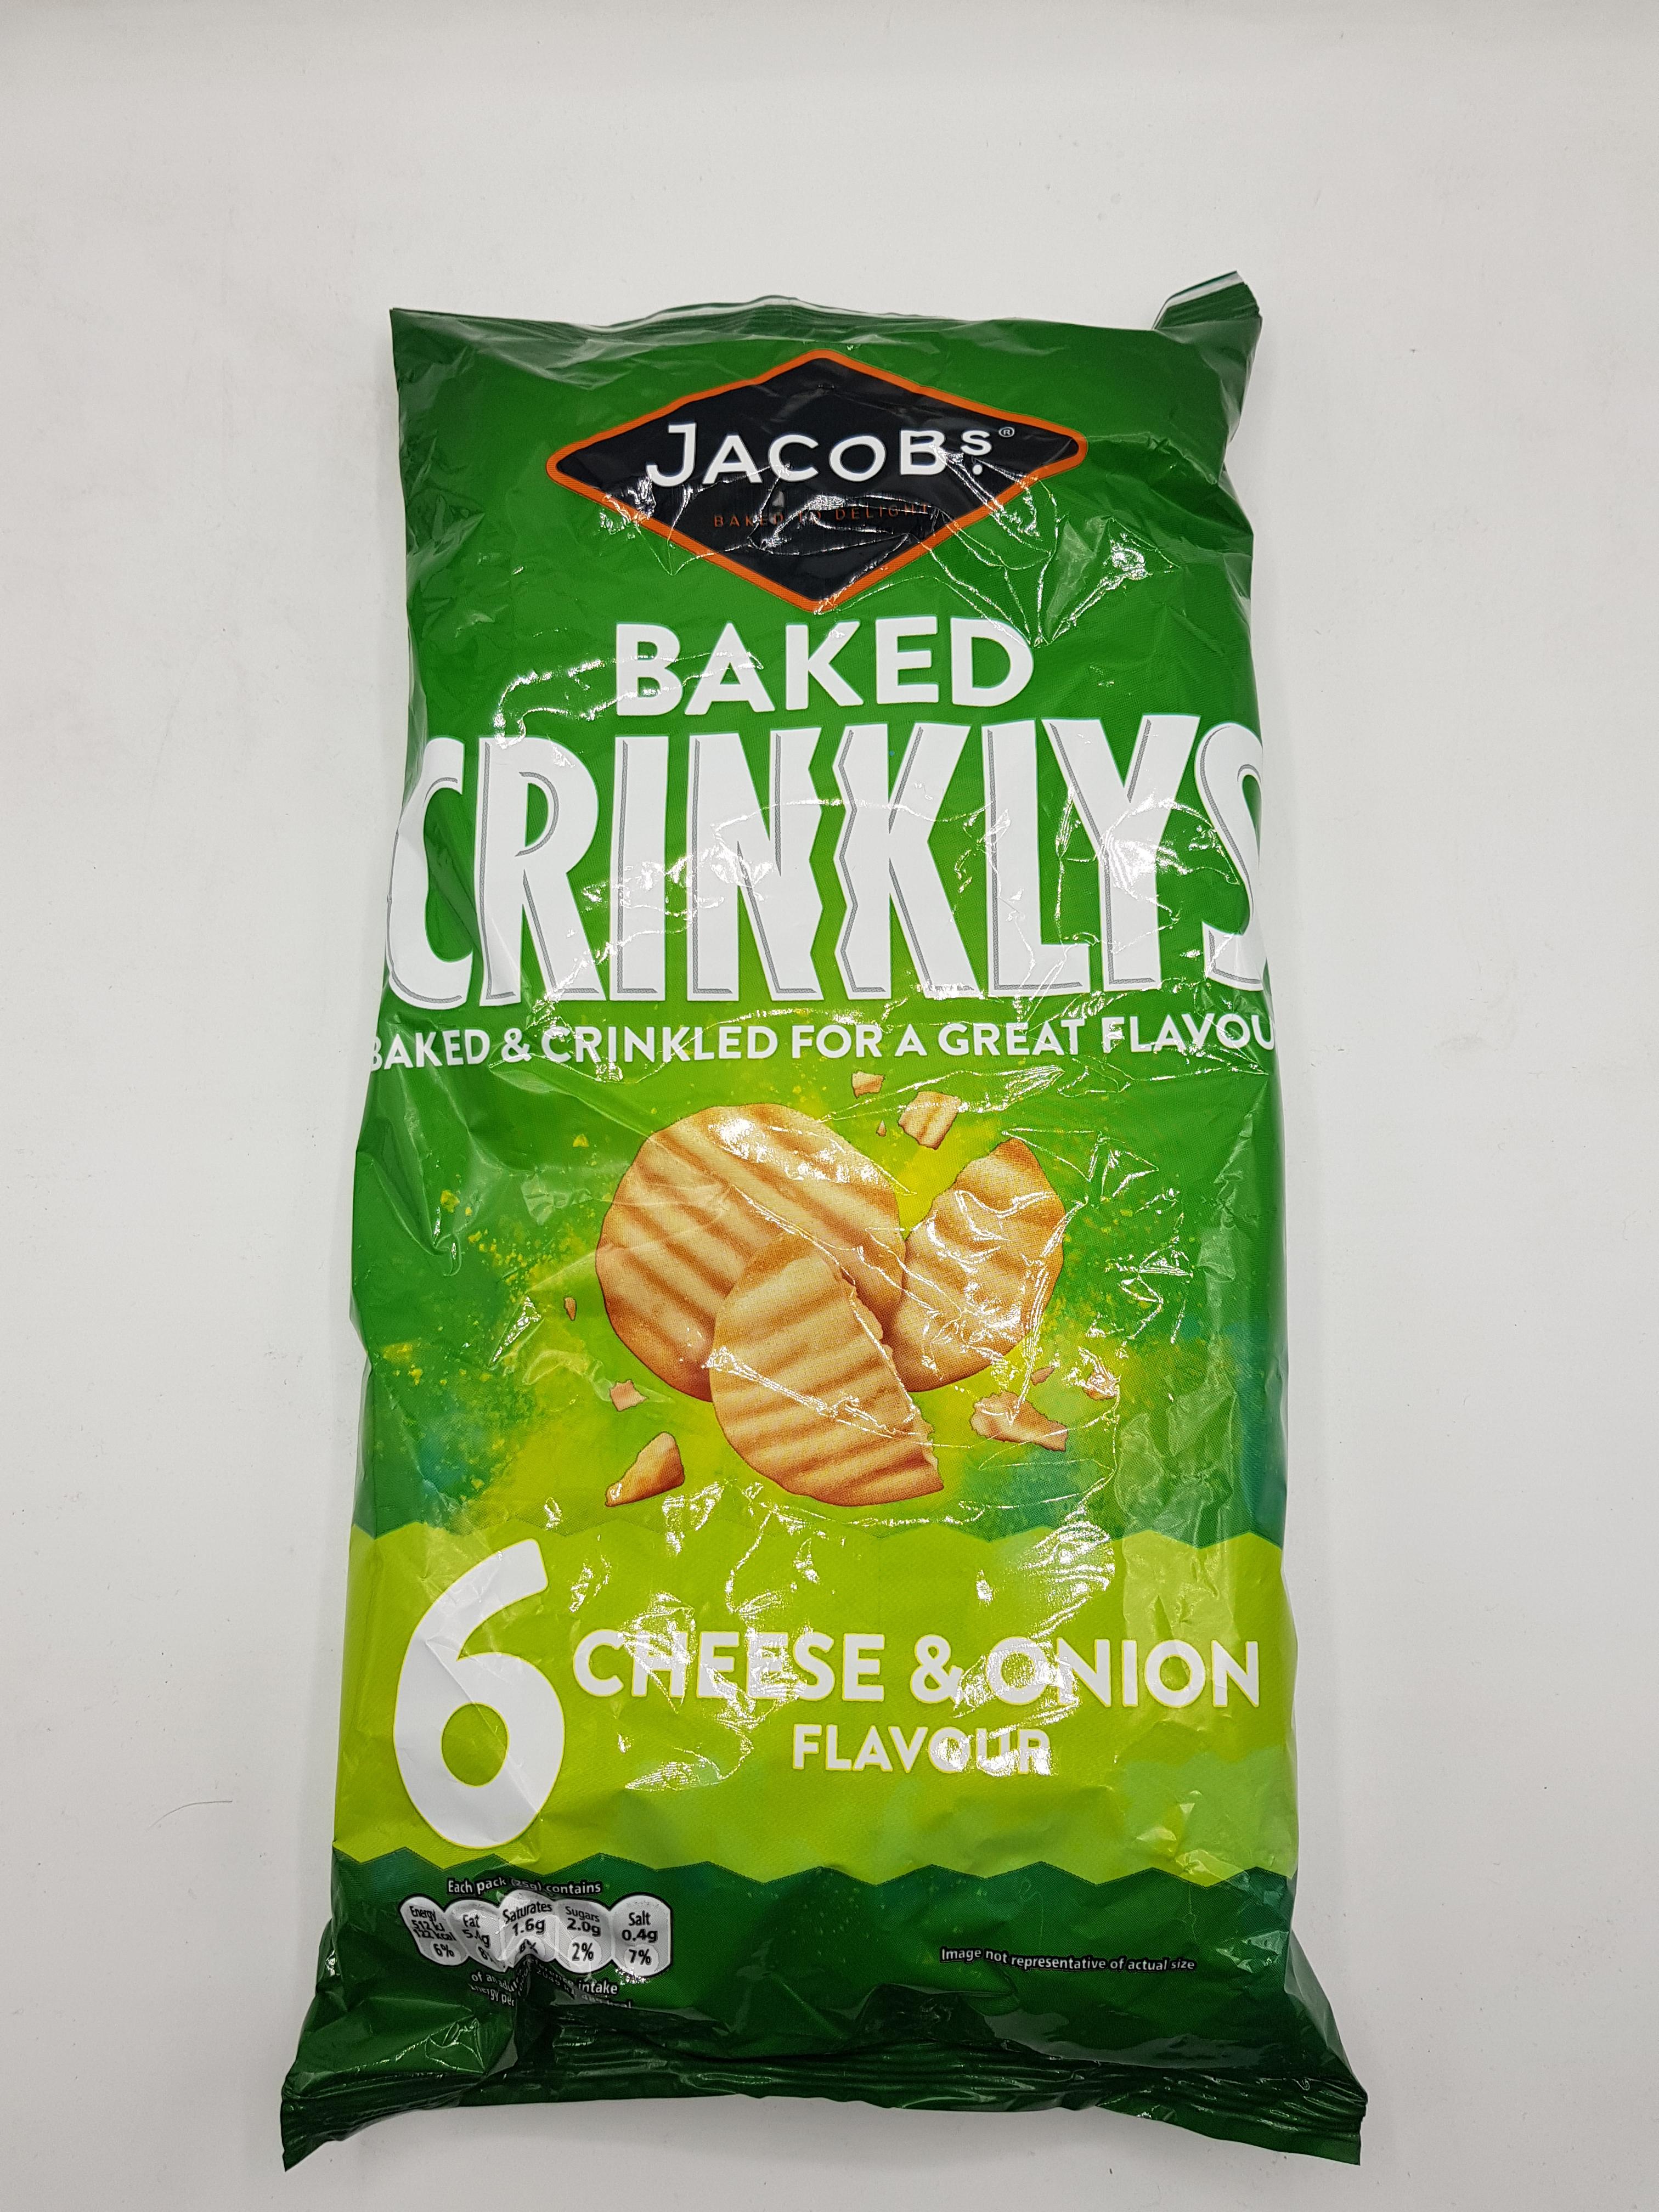 Jacob's Crinkly Cheese & Onion